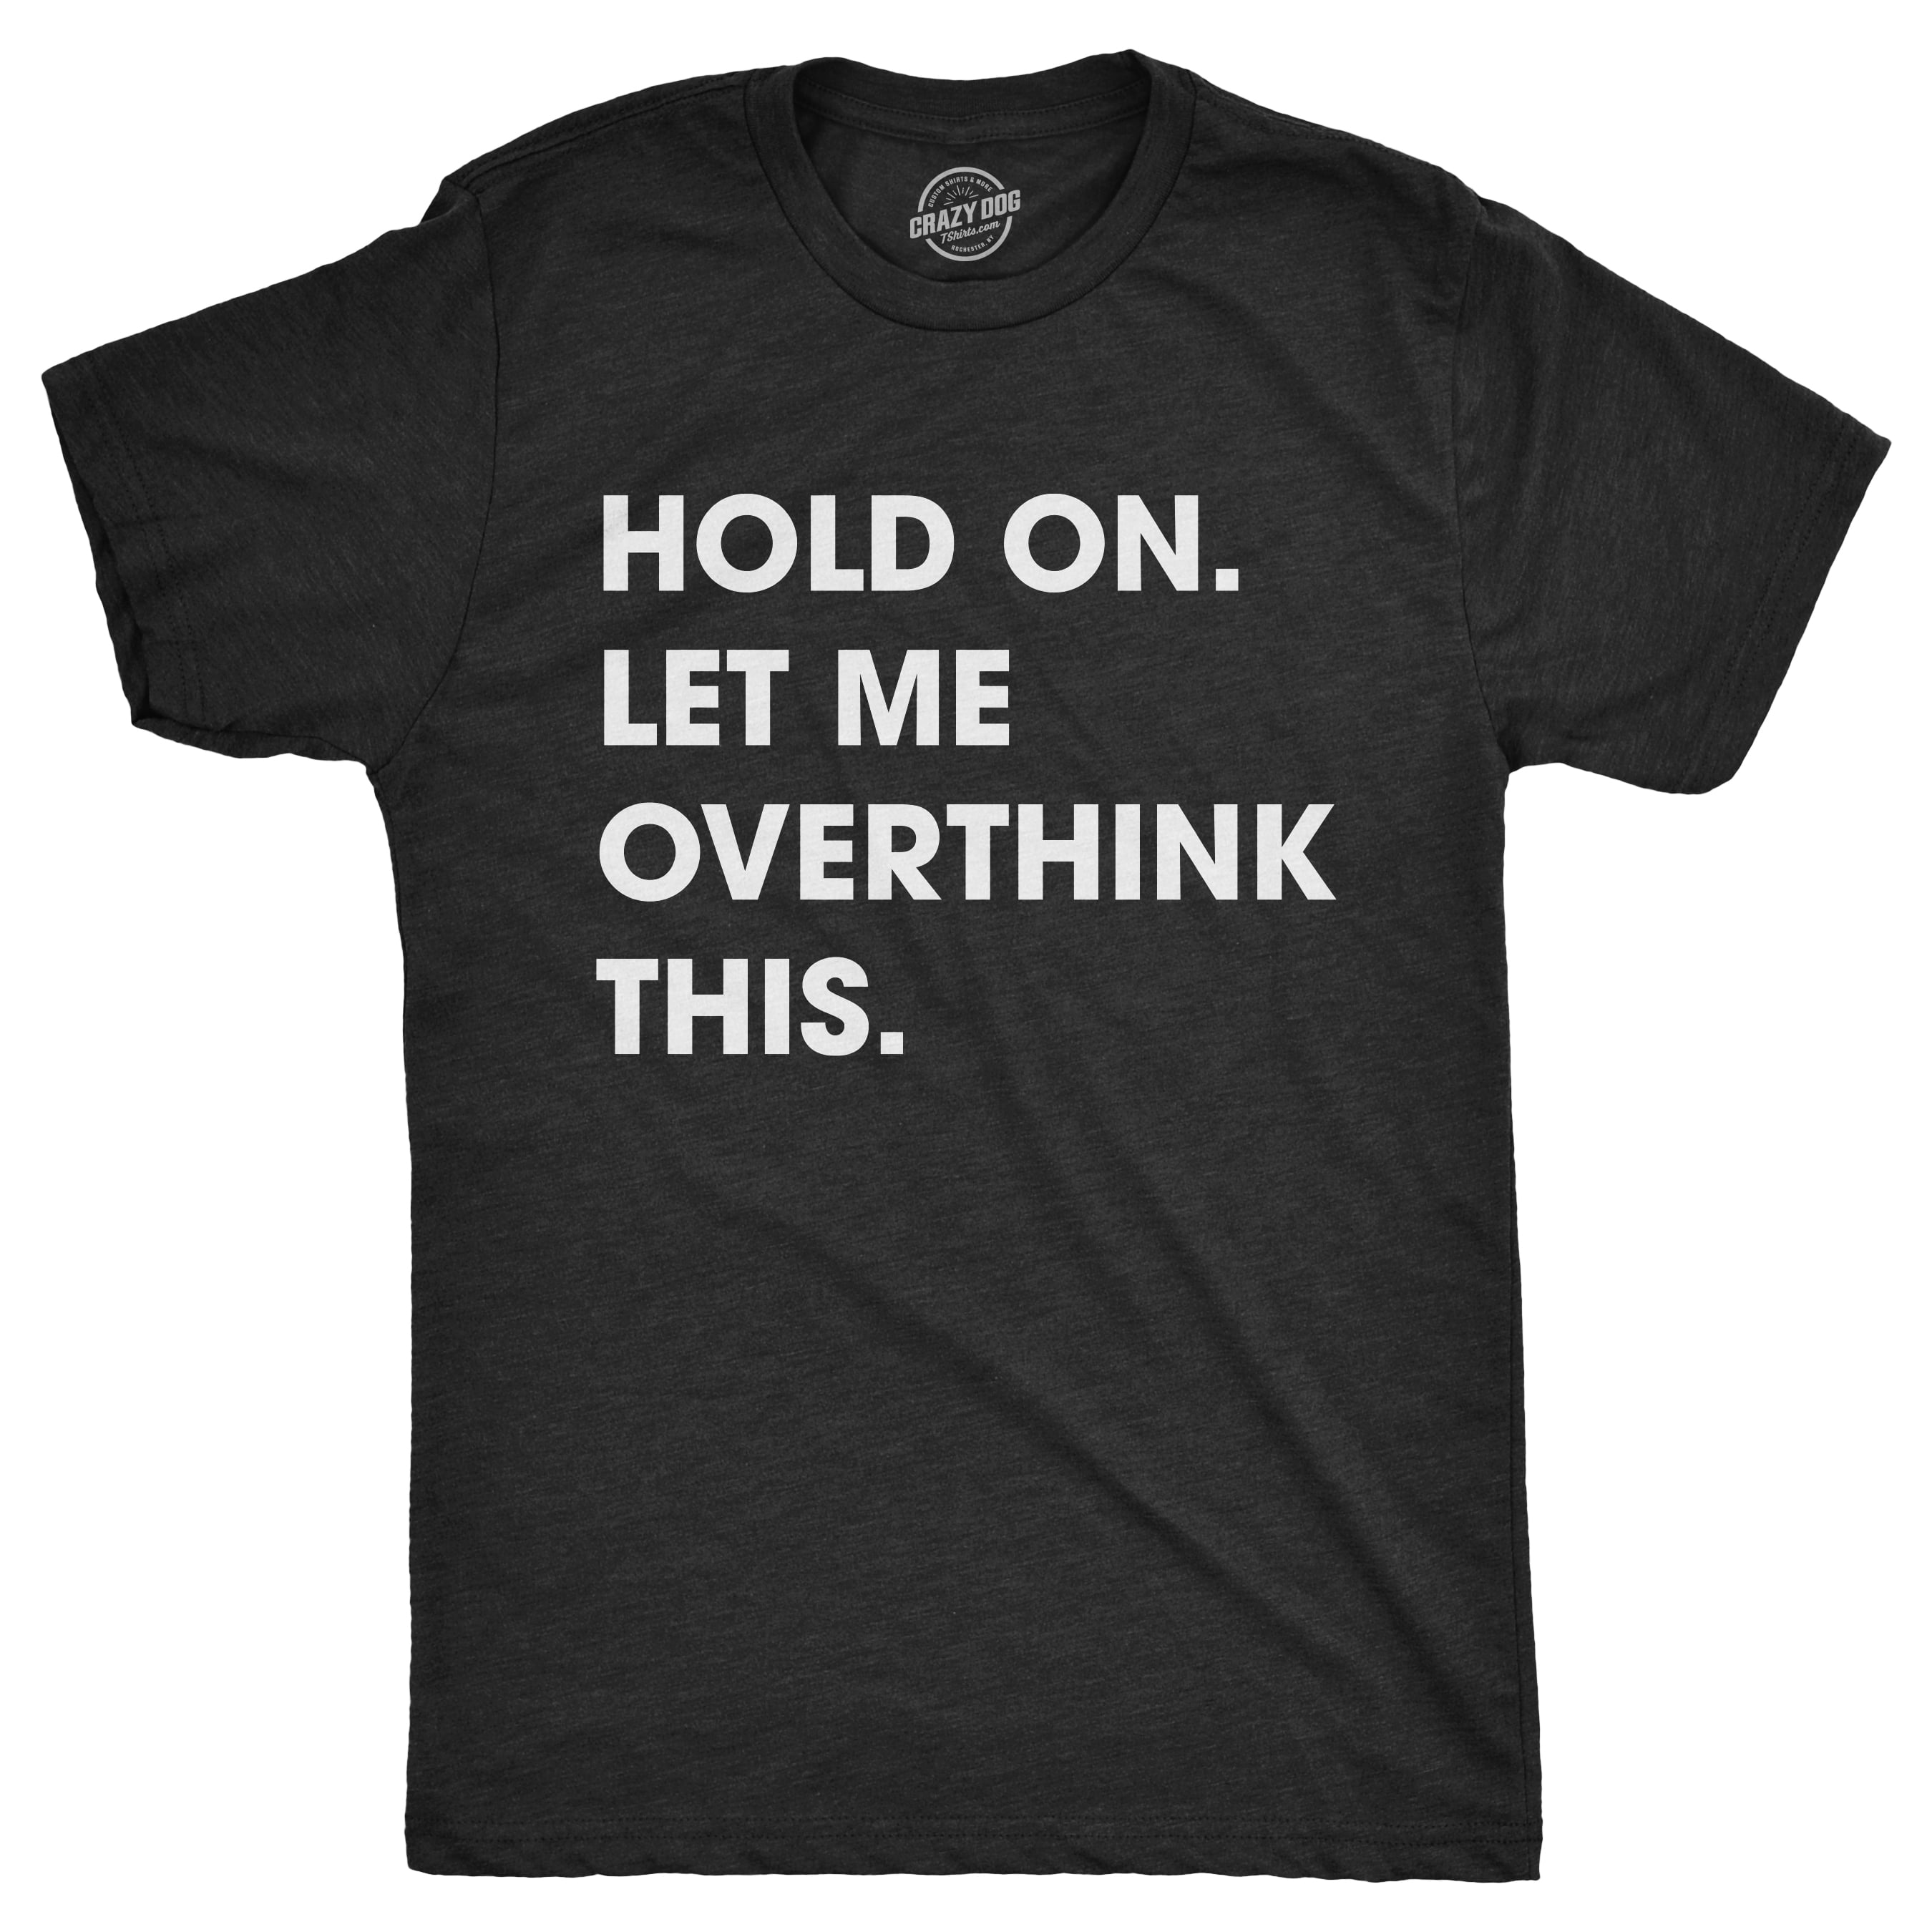 Let Me Overthink This tee-shirt by Unapologetically You 22 Hold On..